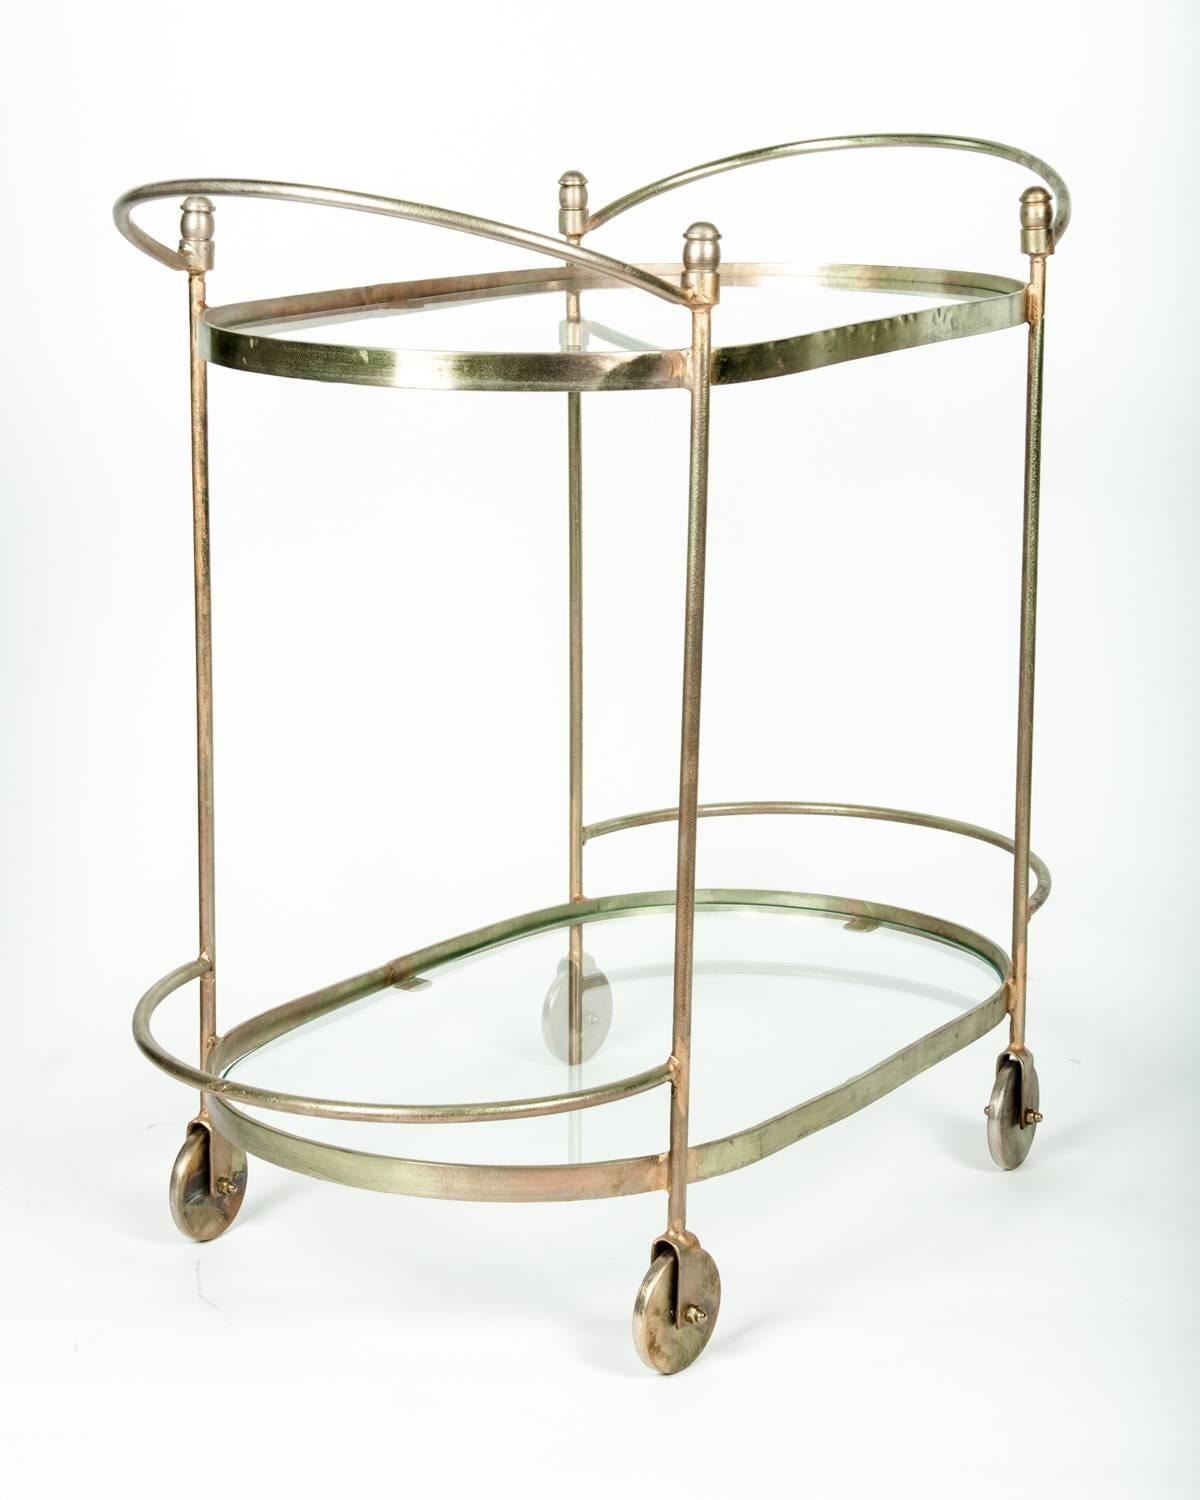 20th Century Mid-Century Solid Brass Two-Tier Tea Cart or Serving Table